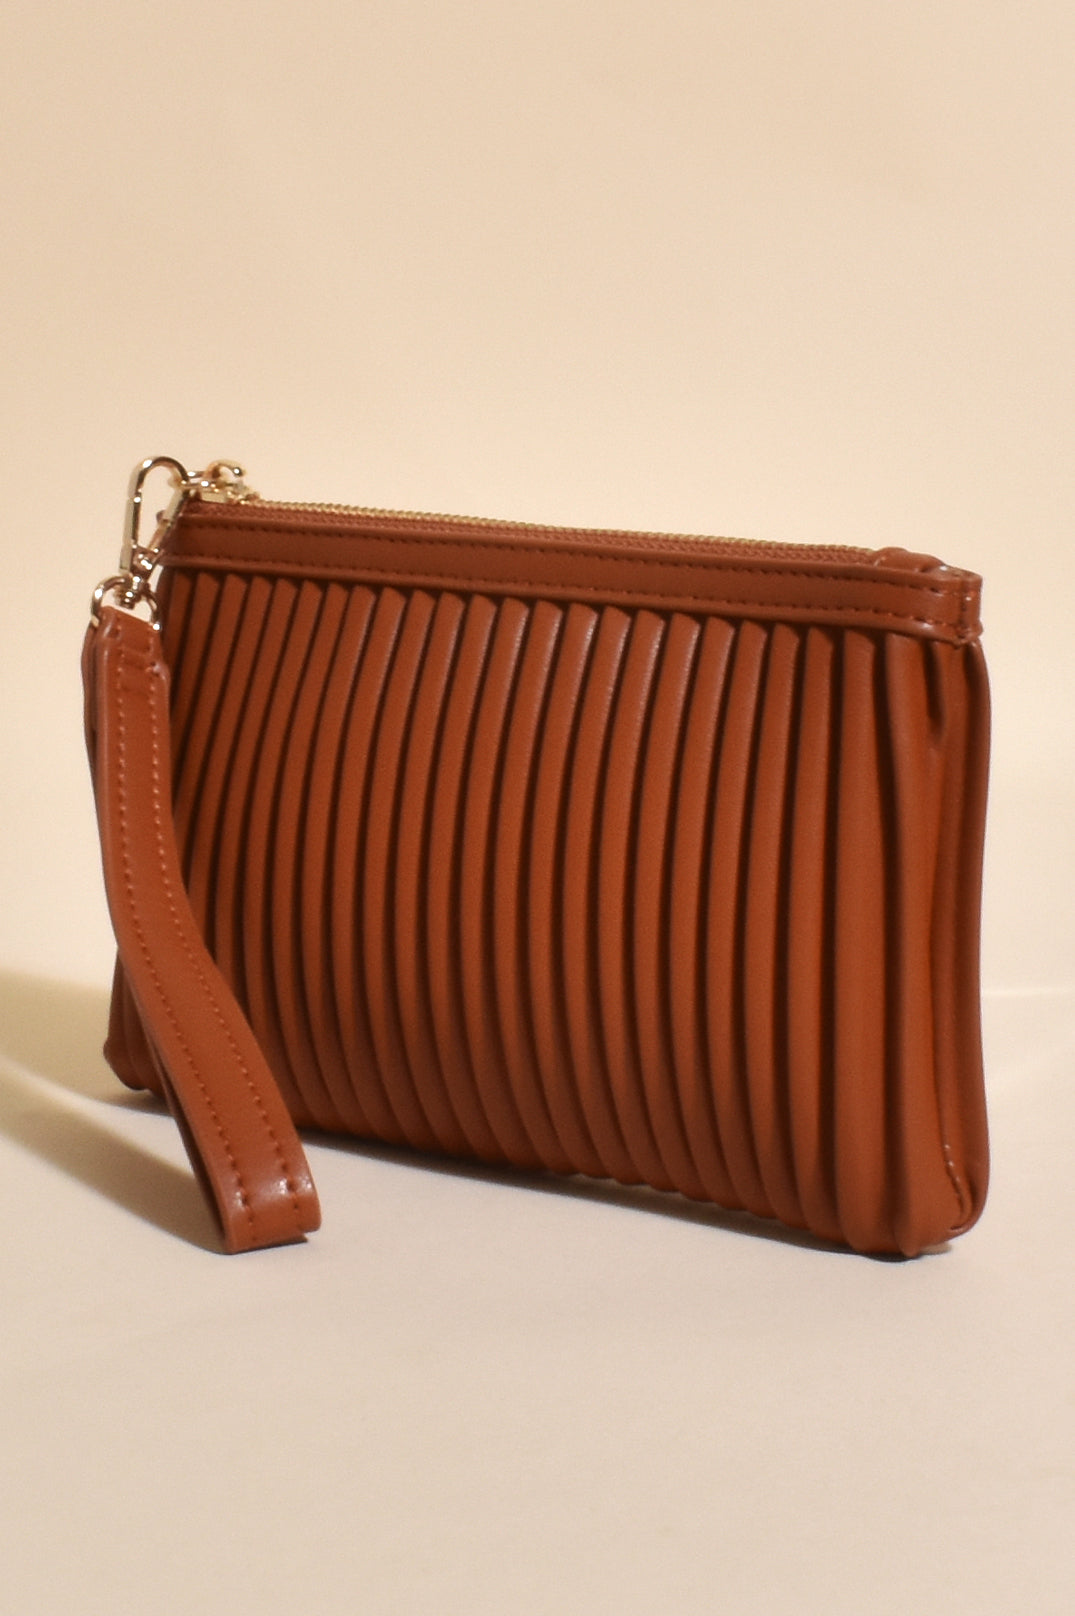 Amara Pleat Design Pouch Bag with Wrist Strap in Tan or Sage.